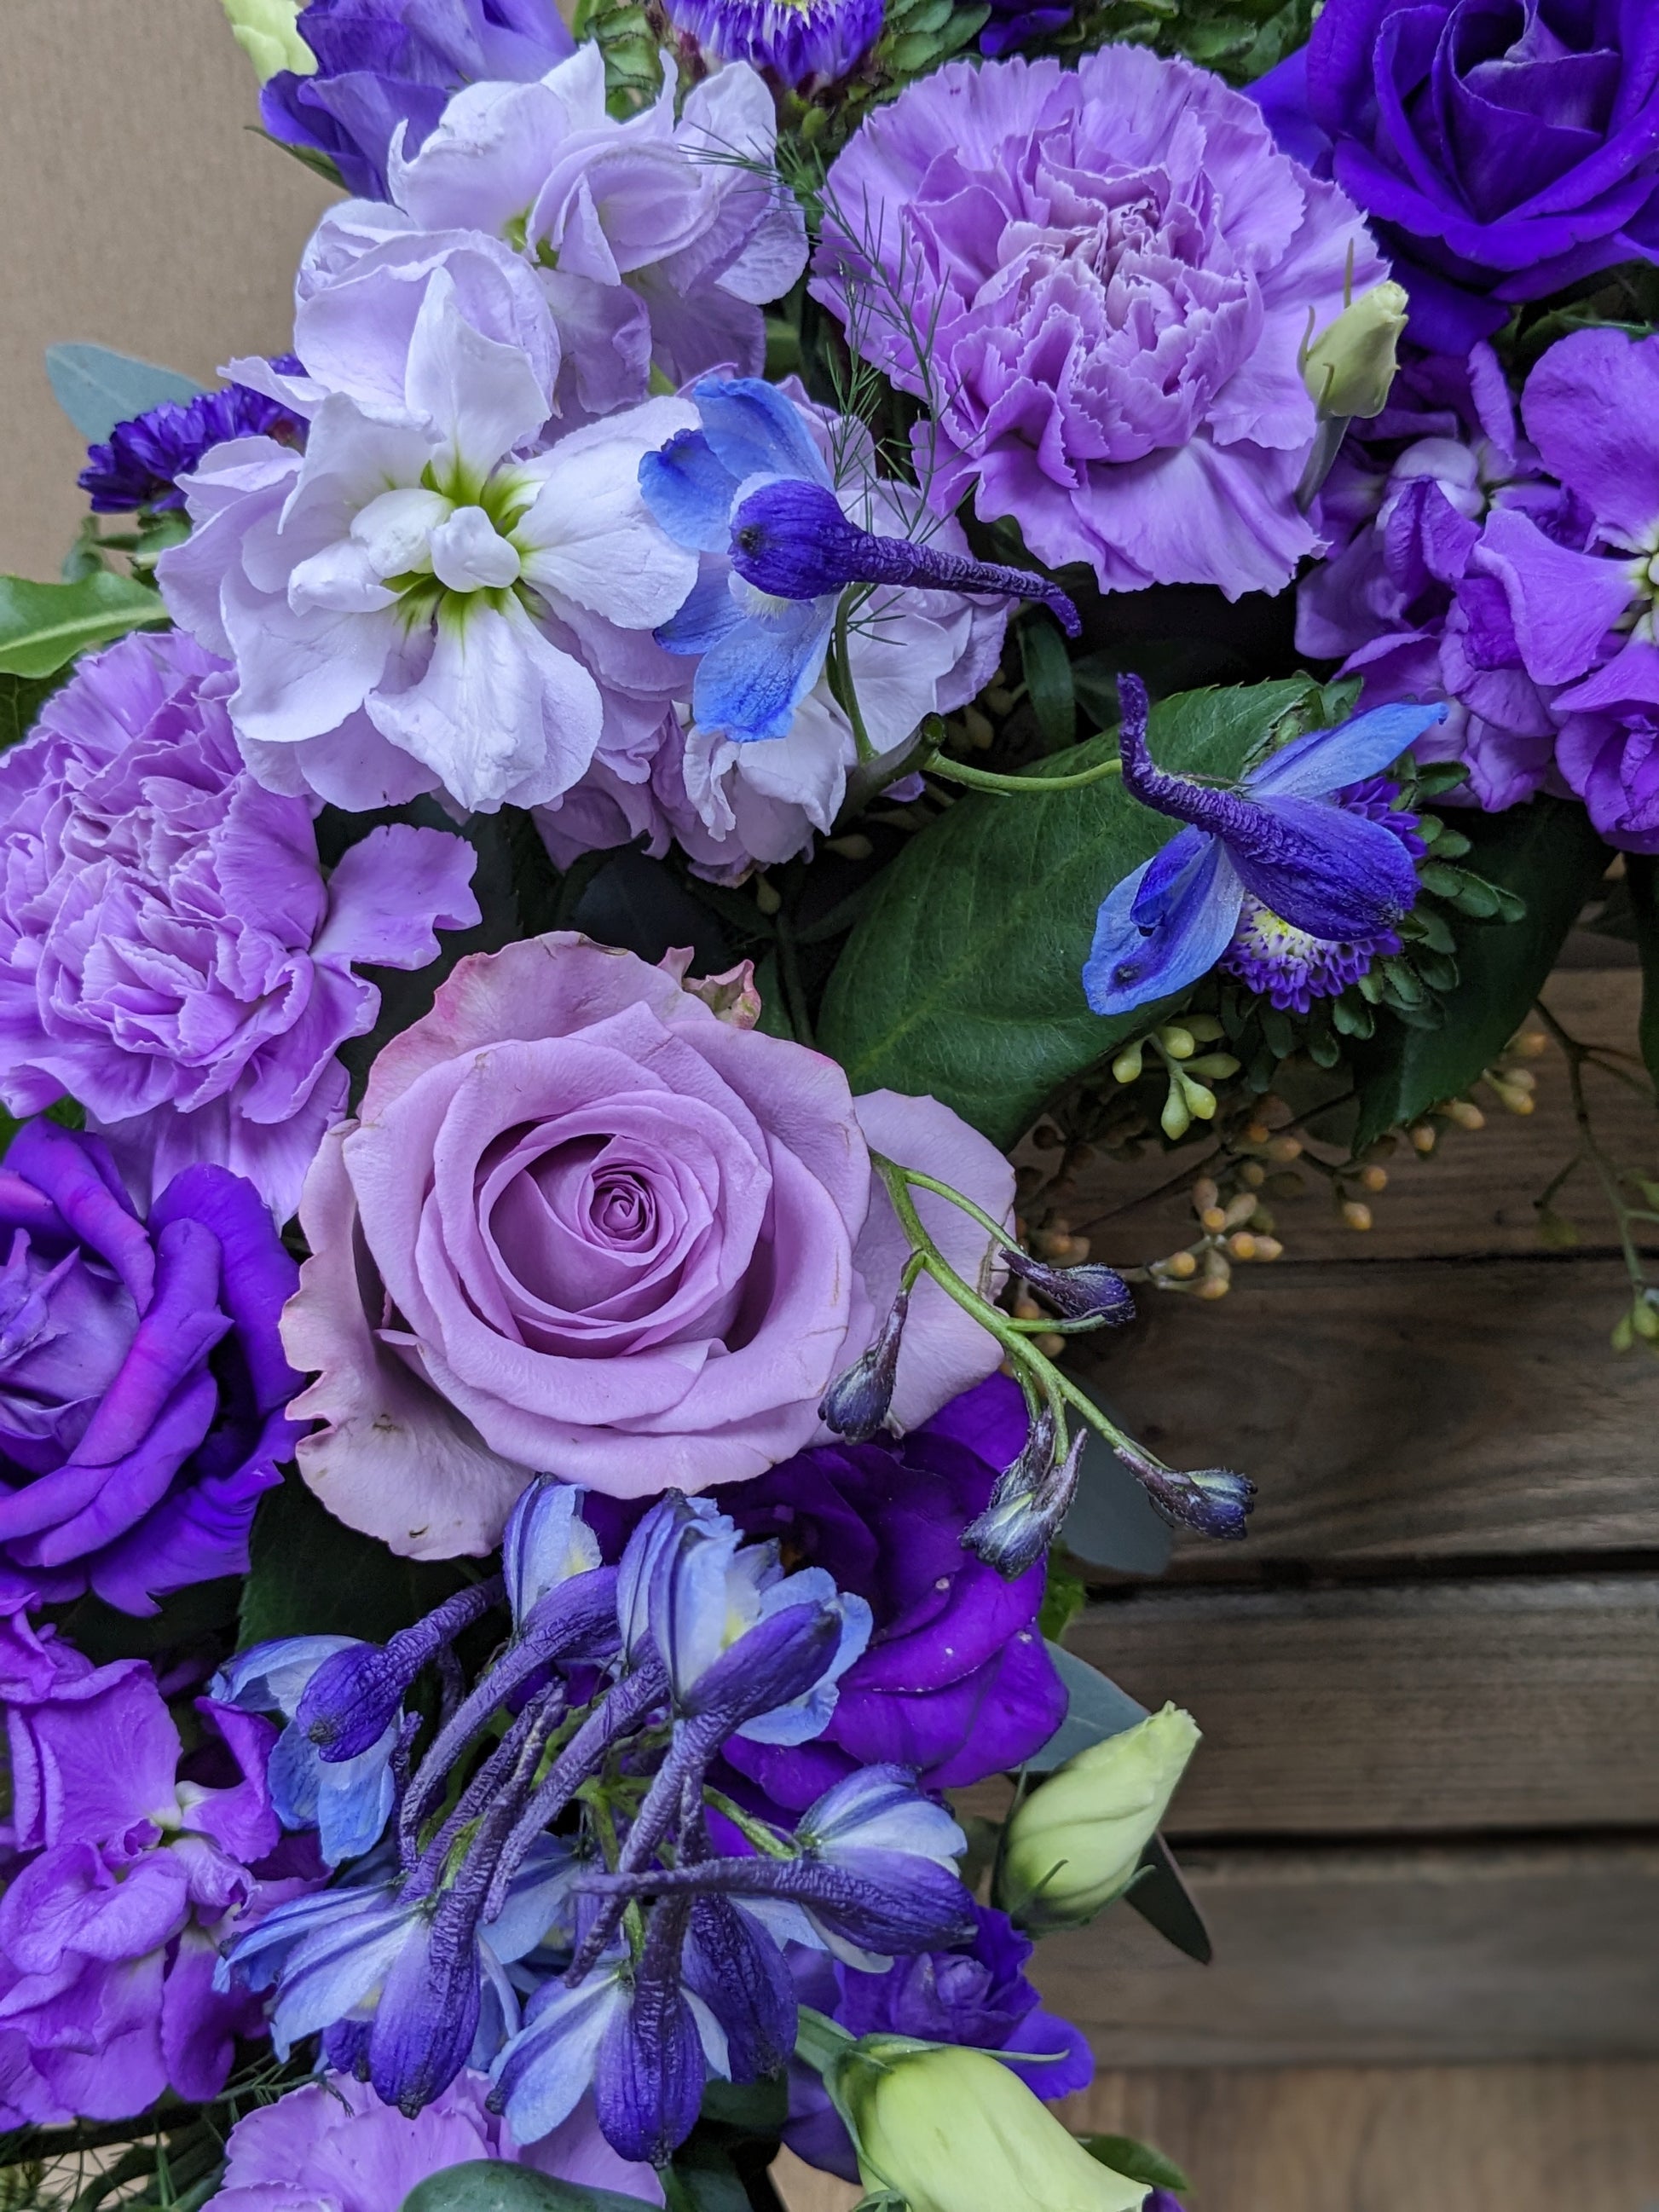 Purple and Blue wreath - Quality Flowers from Ann's Flowers - Just £55! Shop now at Ann's Flowers